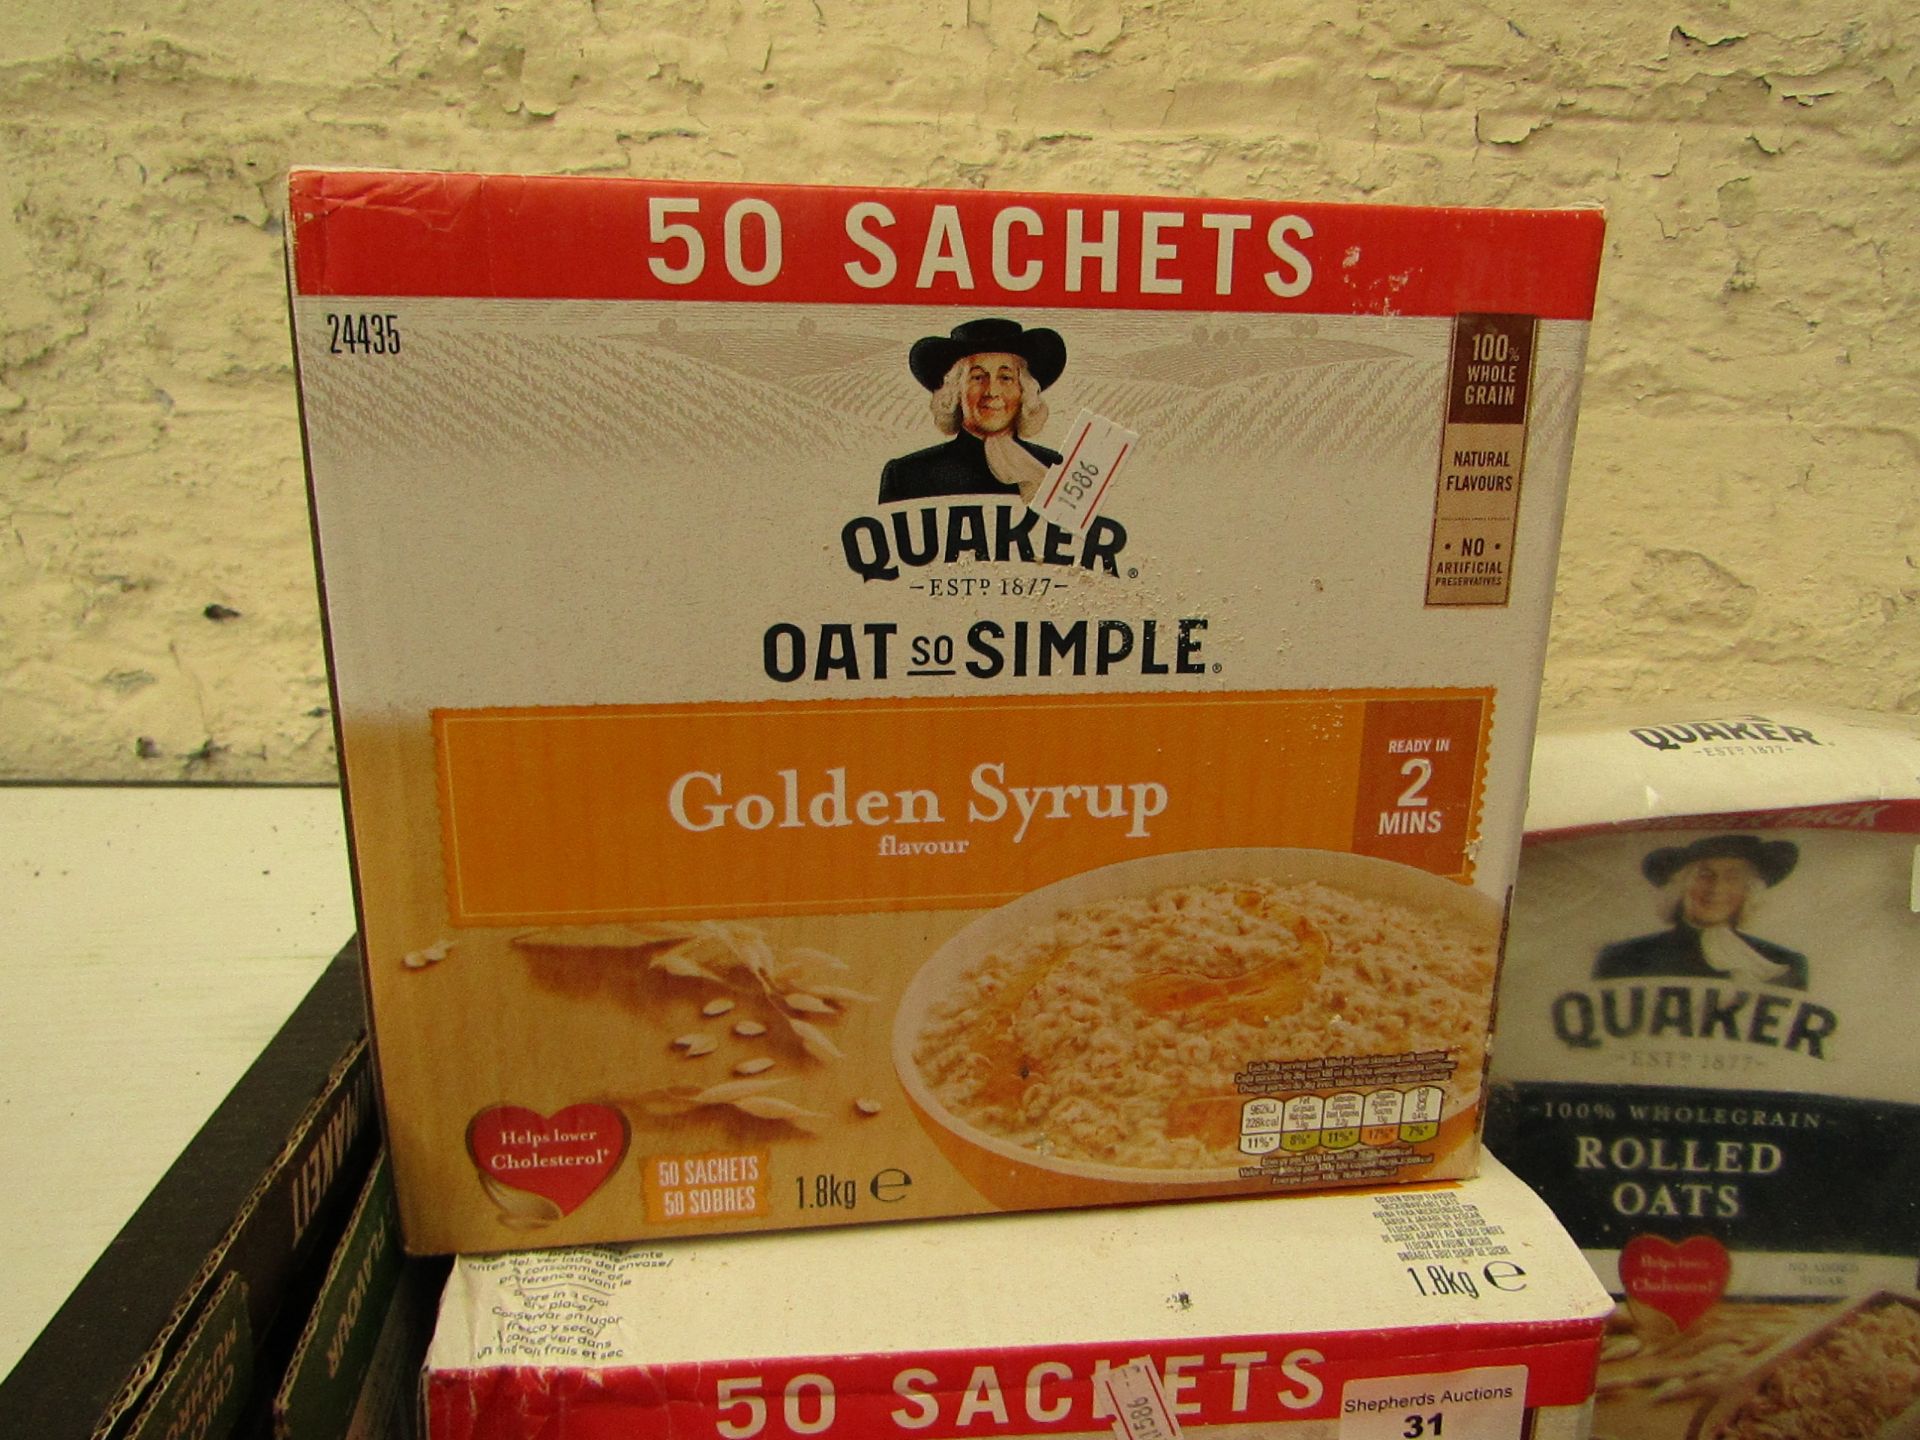 Box containing Approx 50 Sachets of Quaker Oats so Simple Golden Syrup, BBE 23/03/2021